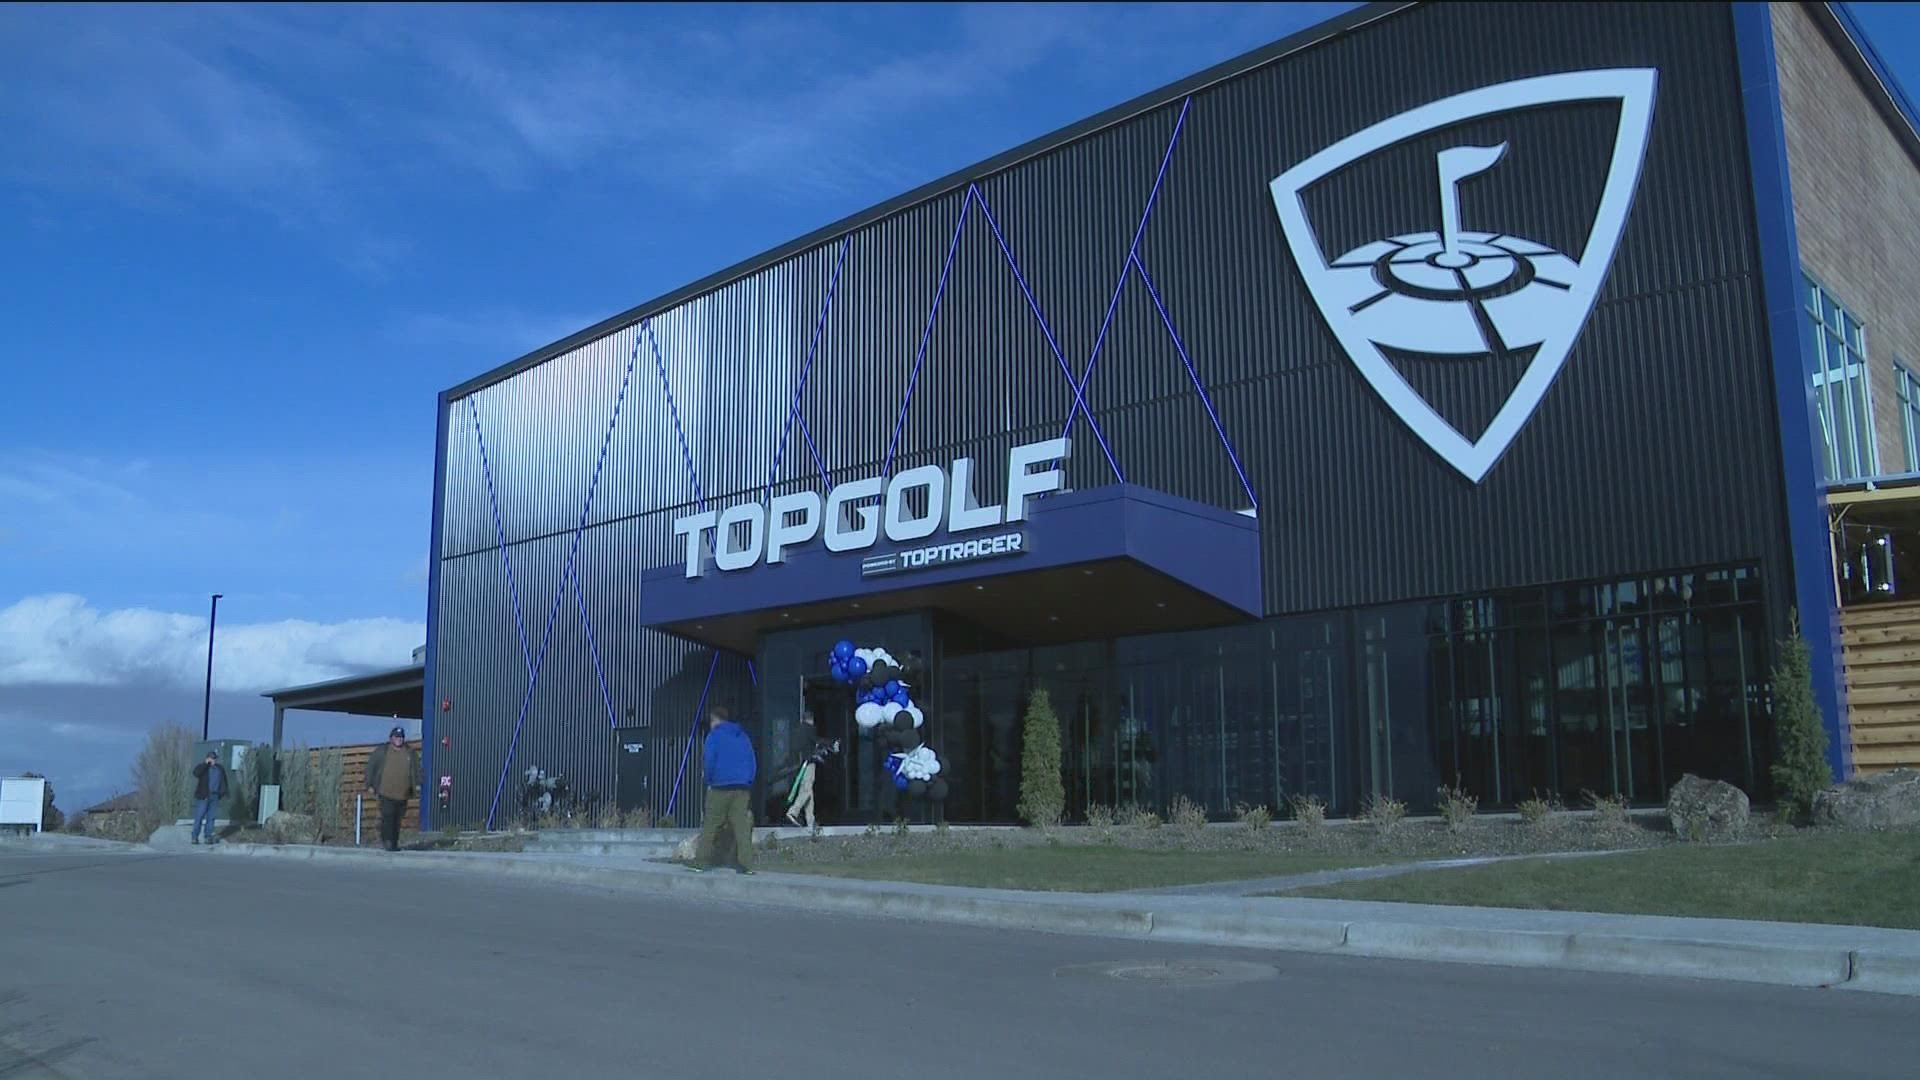 Players aim at on-field targets from 60 hitting bays, and technology tracks the flight of the ball. Topgolf Boise also has miniature golf, cornhole and a full bar.